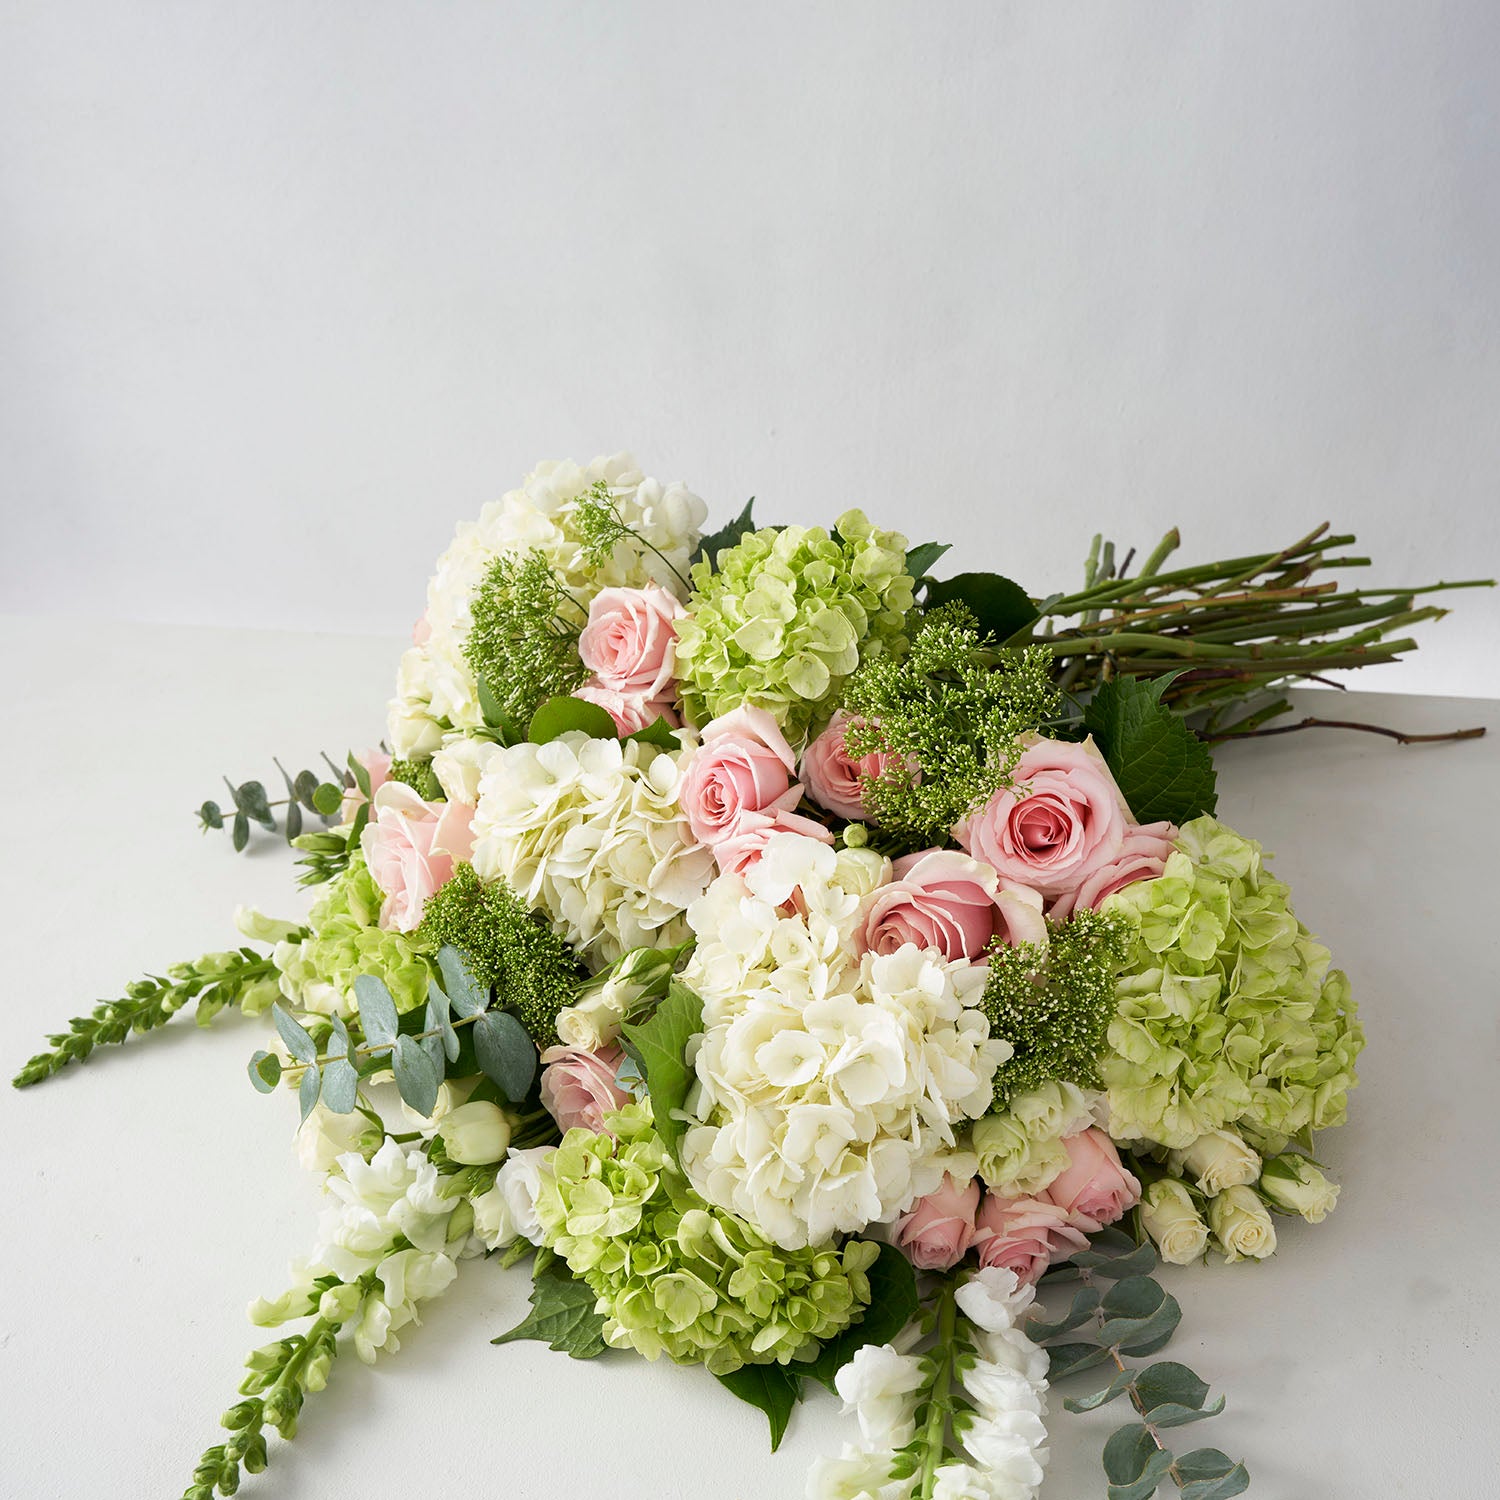 Bouquet of pale green white and pale pink flowers, uncluding hydrangea, roses, snap dragons, and eucalyptus, laid out on white surface. 